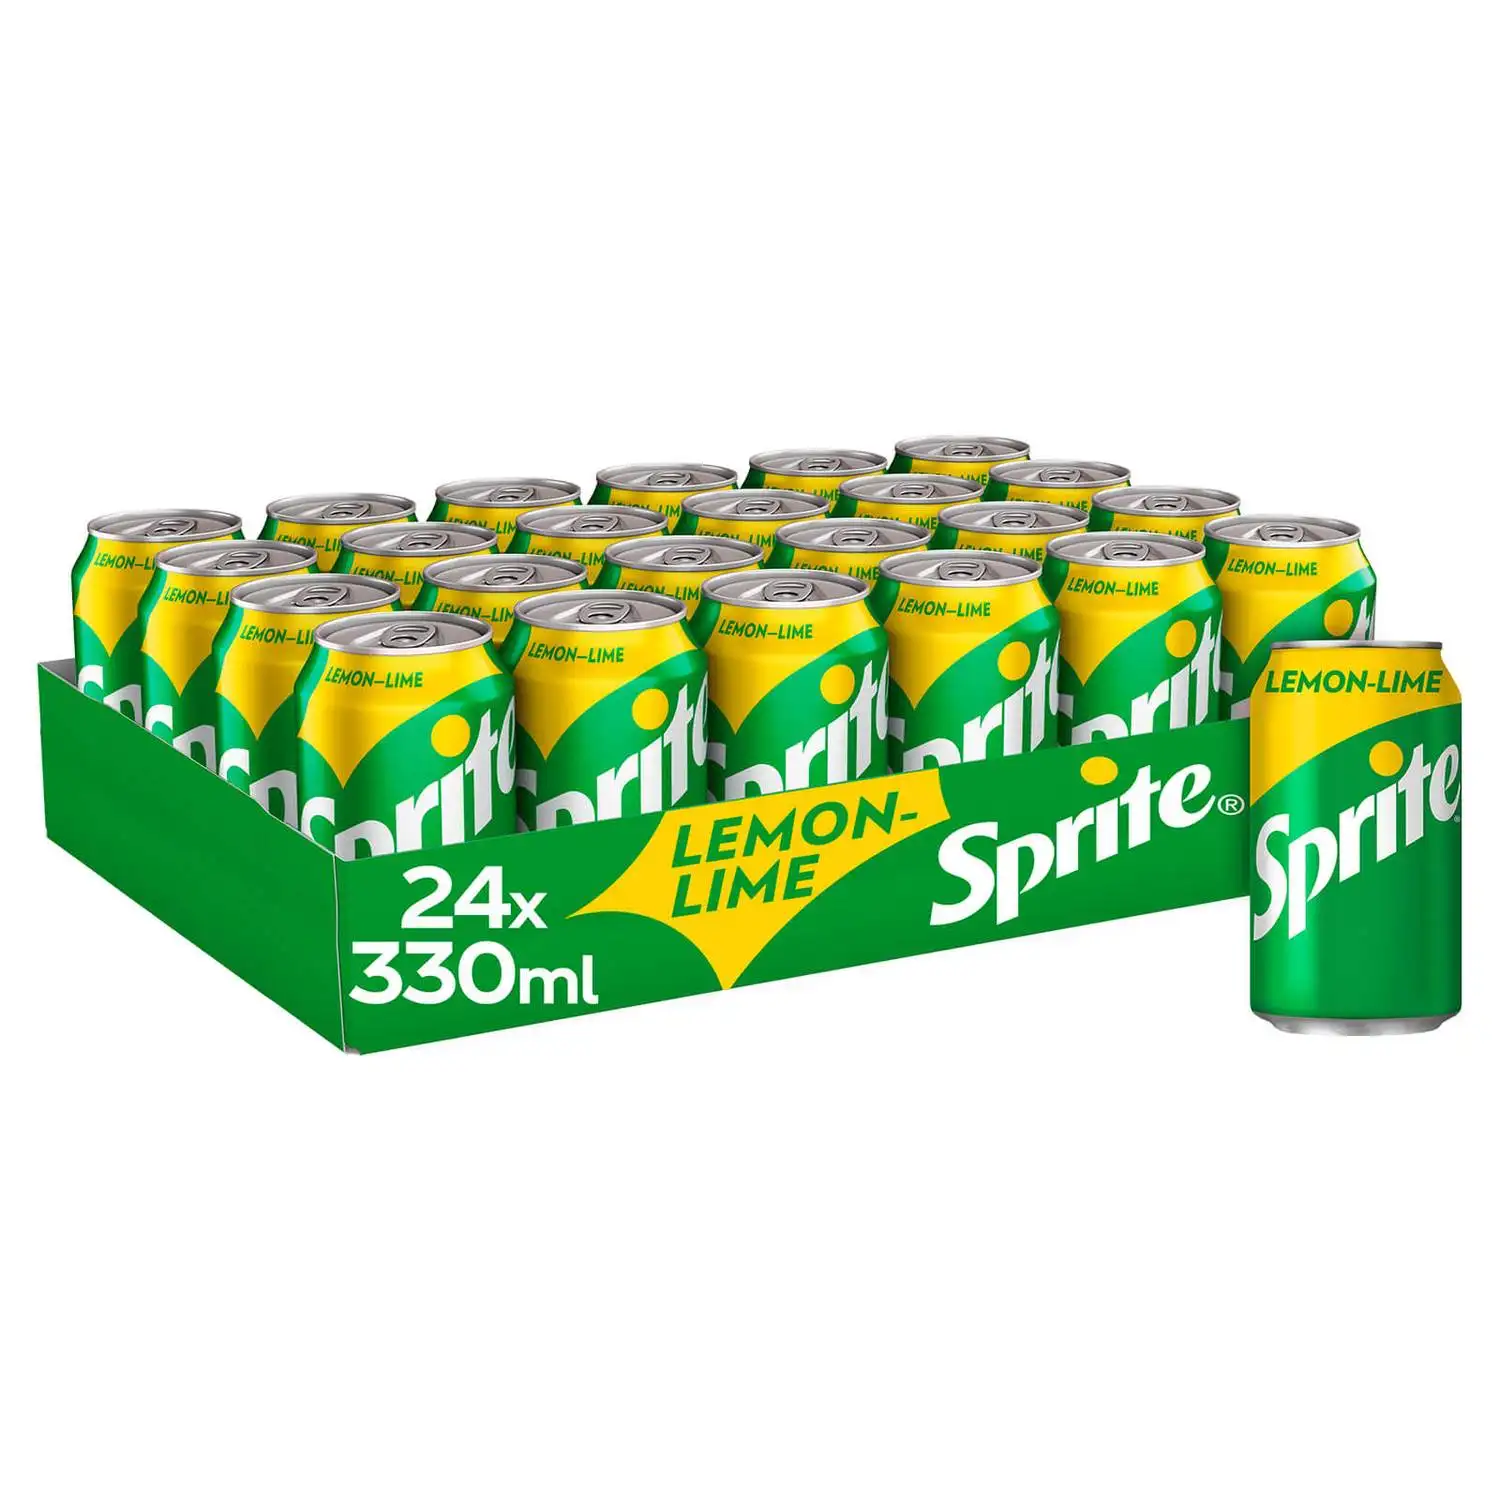 wholesale soft drink brand Sprite in CAN 330 ml